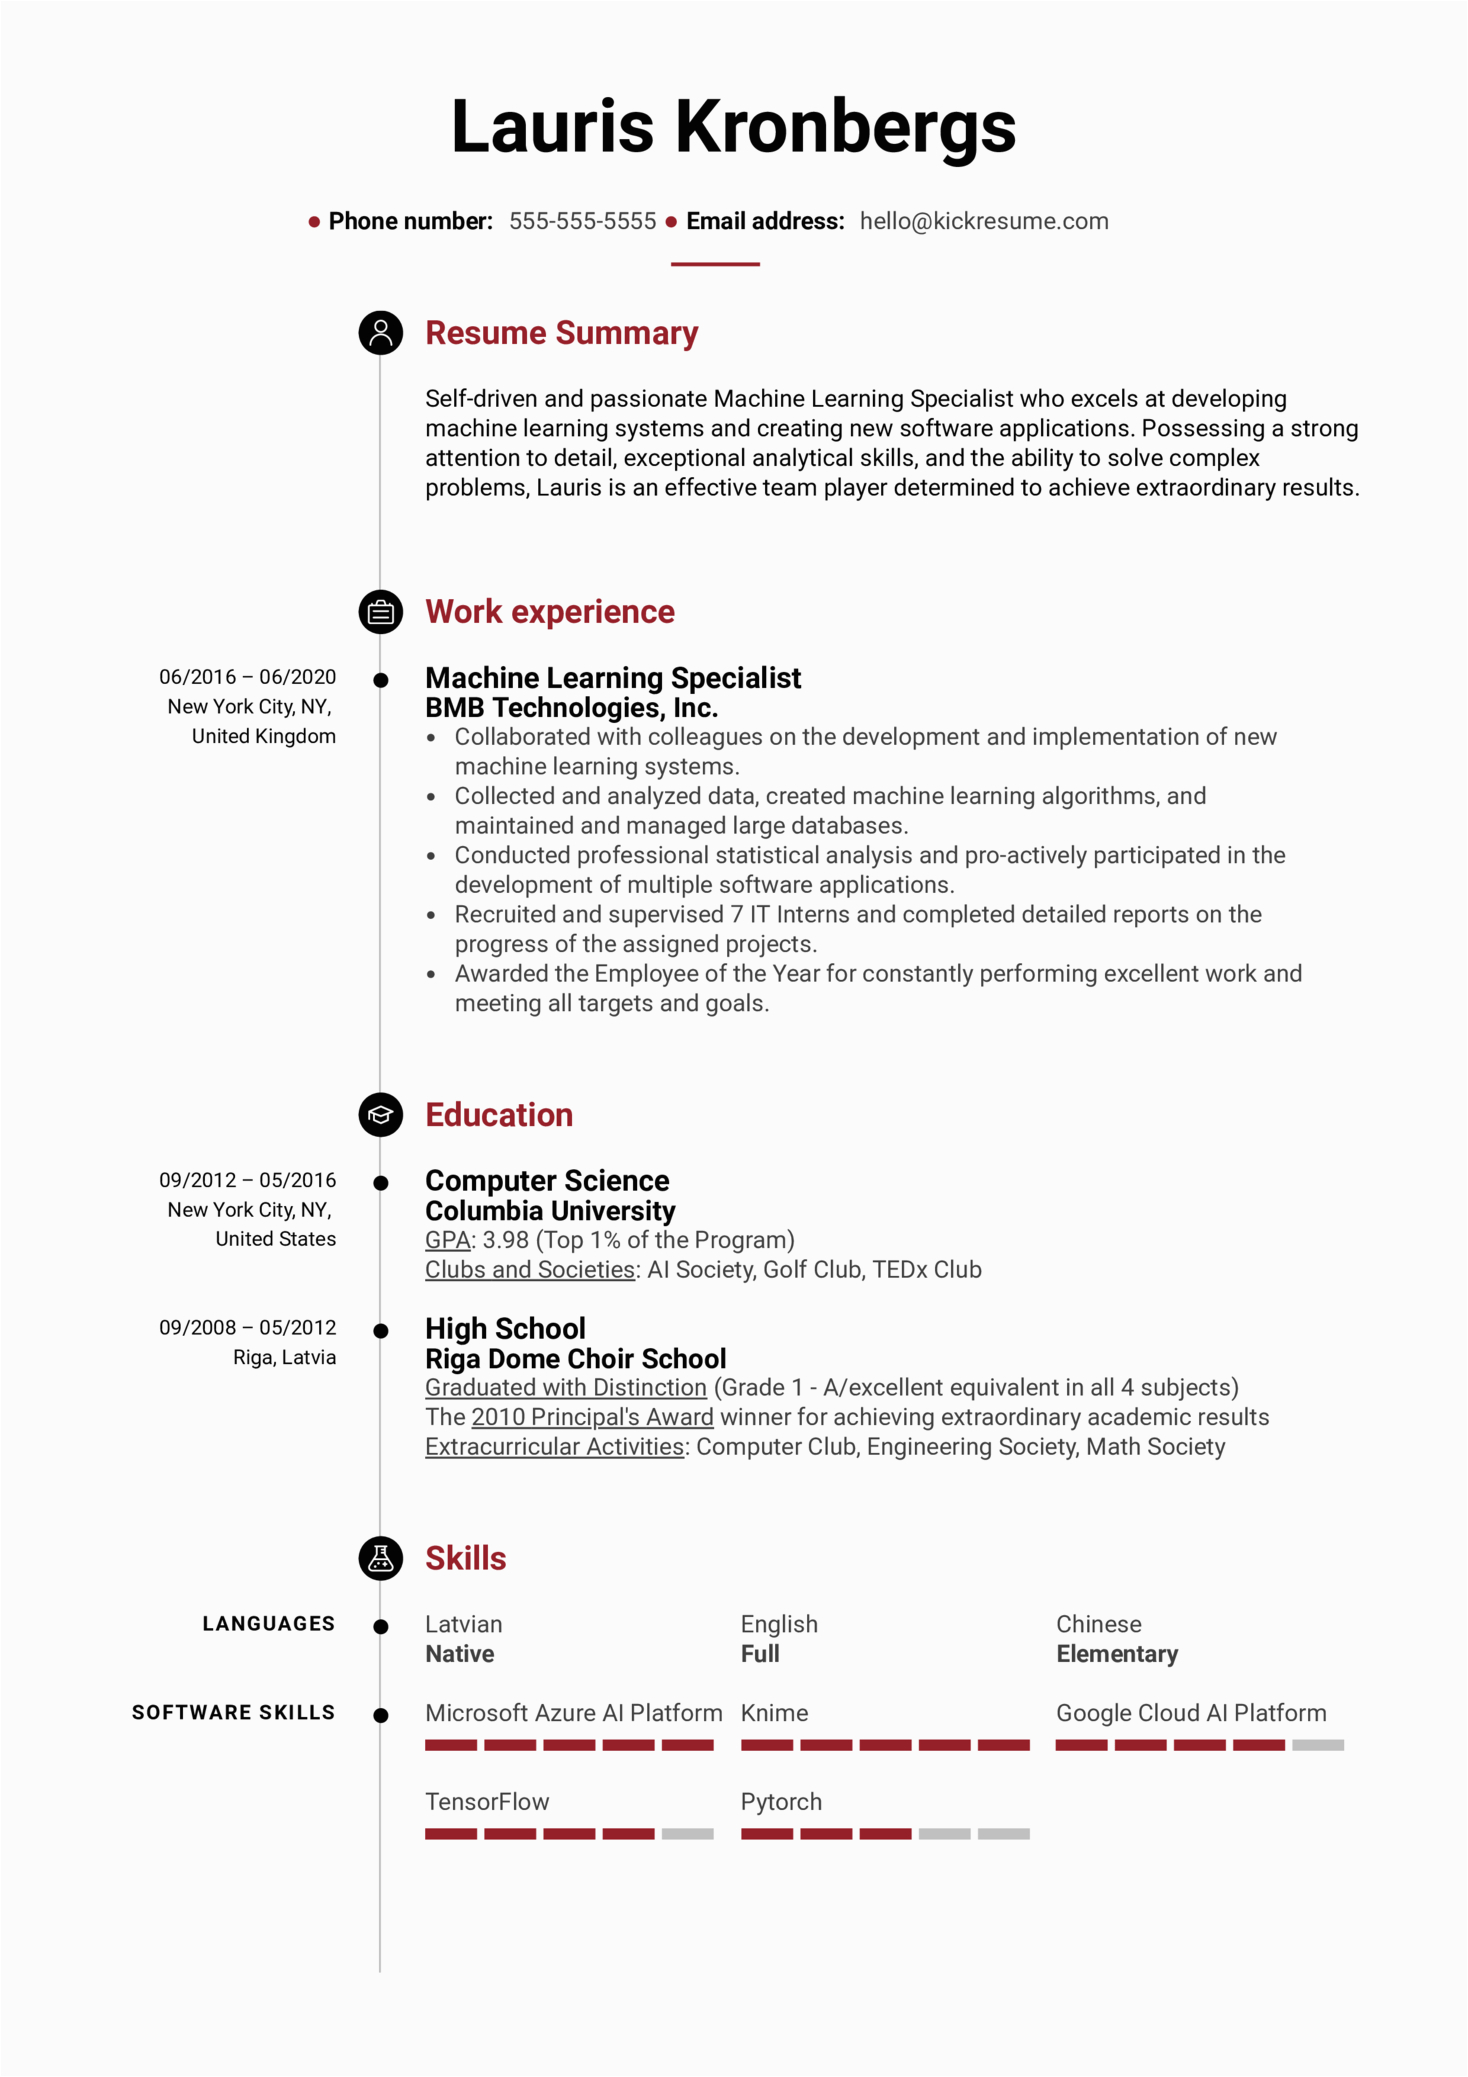 Sample Resumes for Machine Learnign Jobs Machine Learning Specialist Resume Example